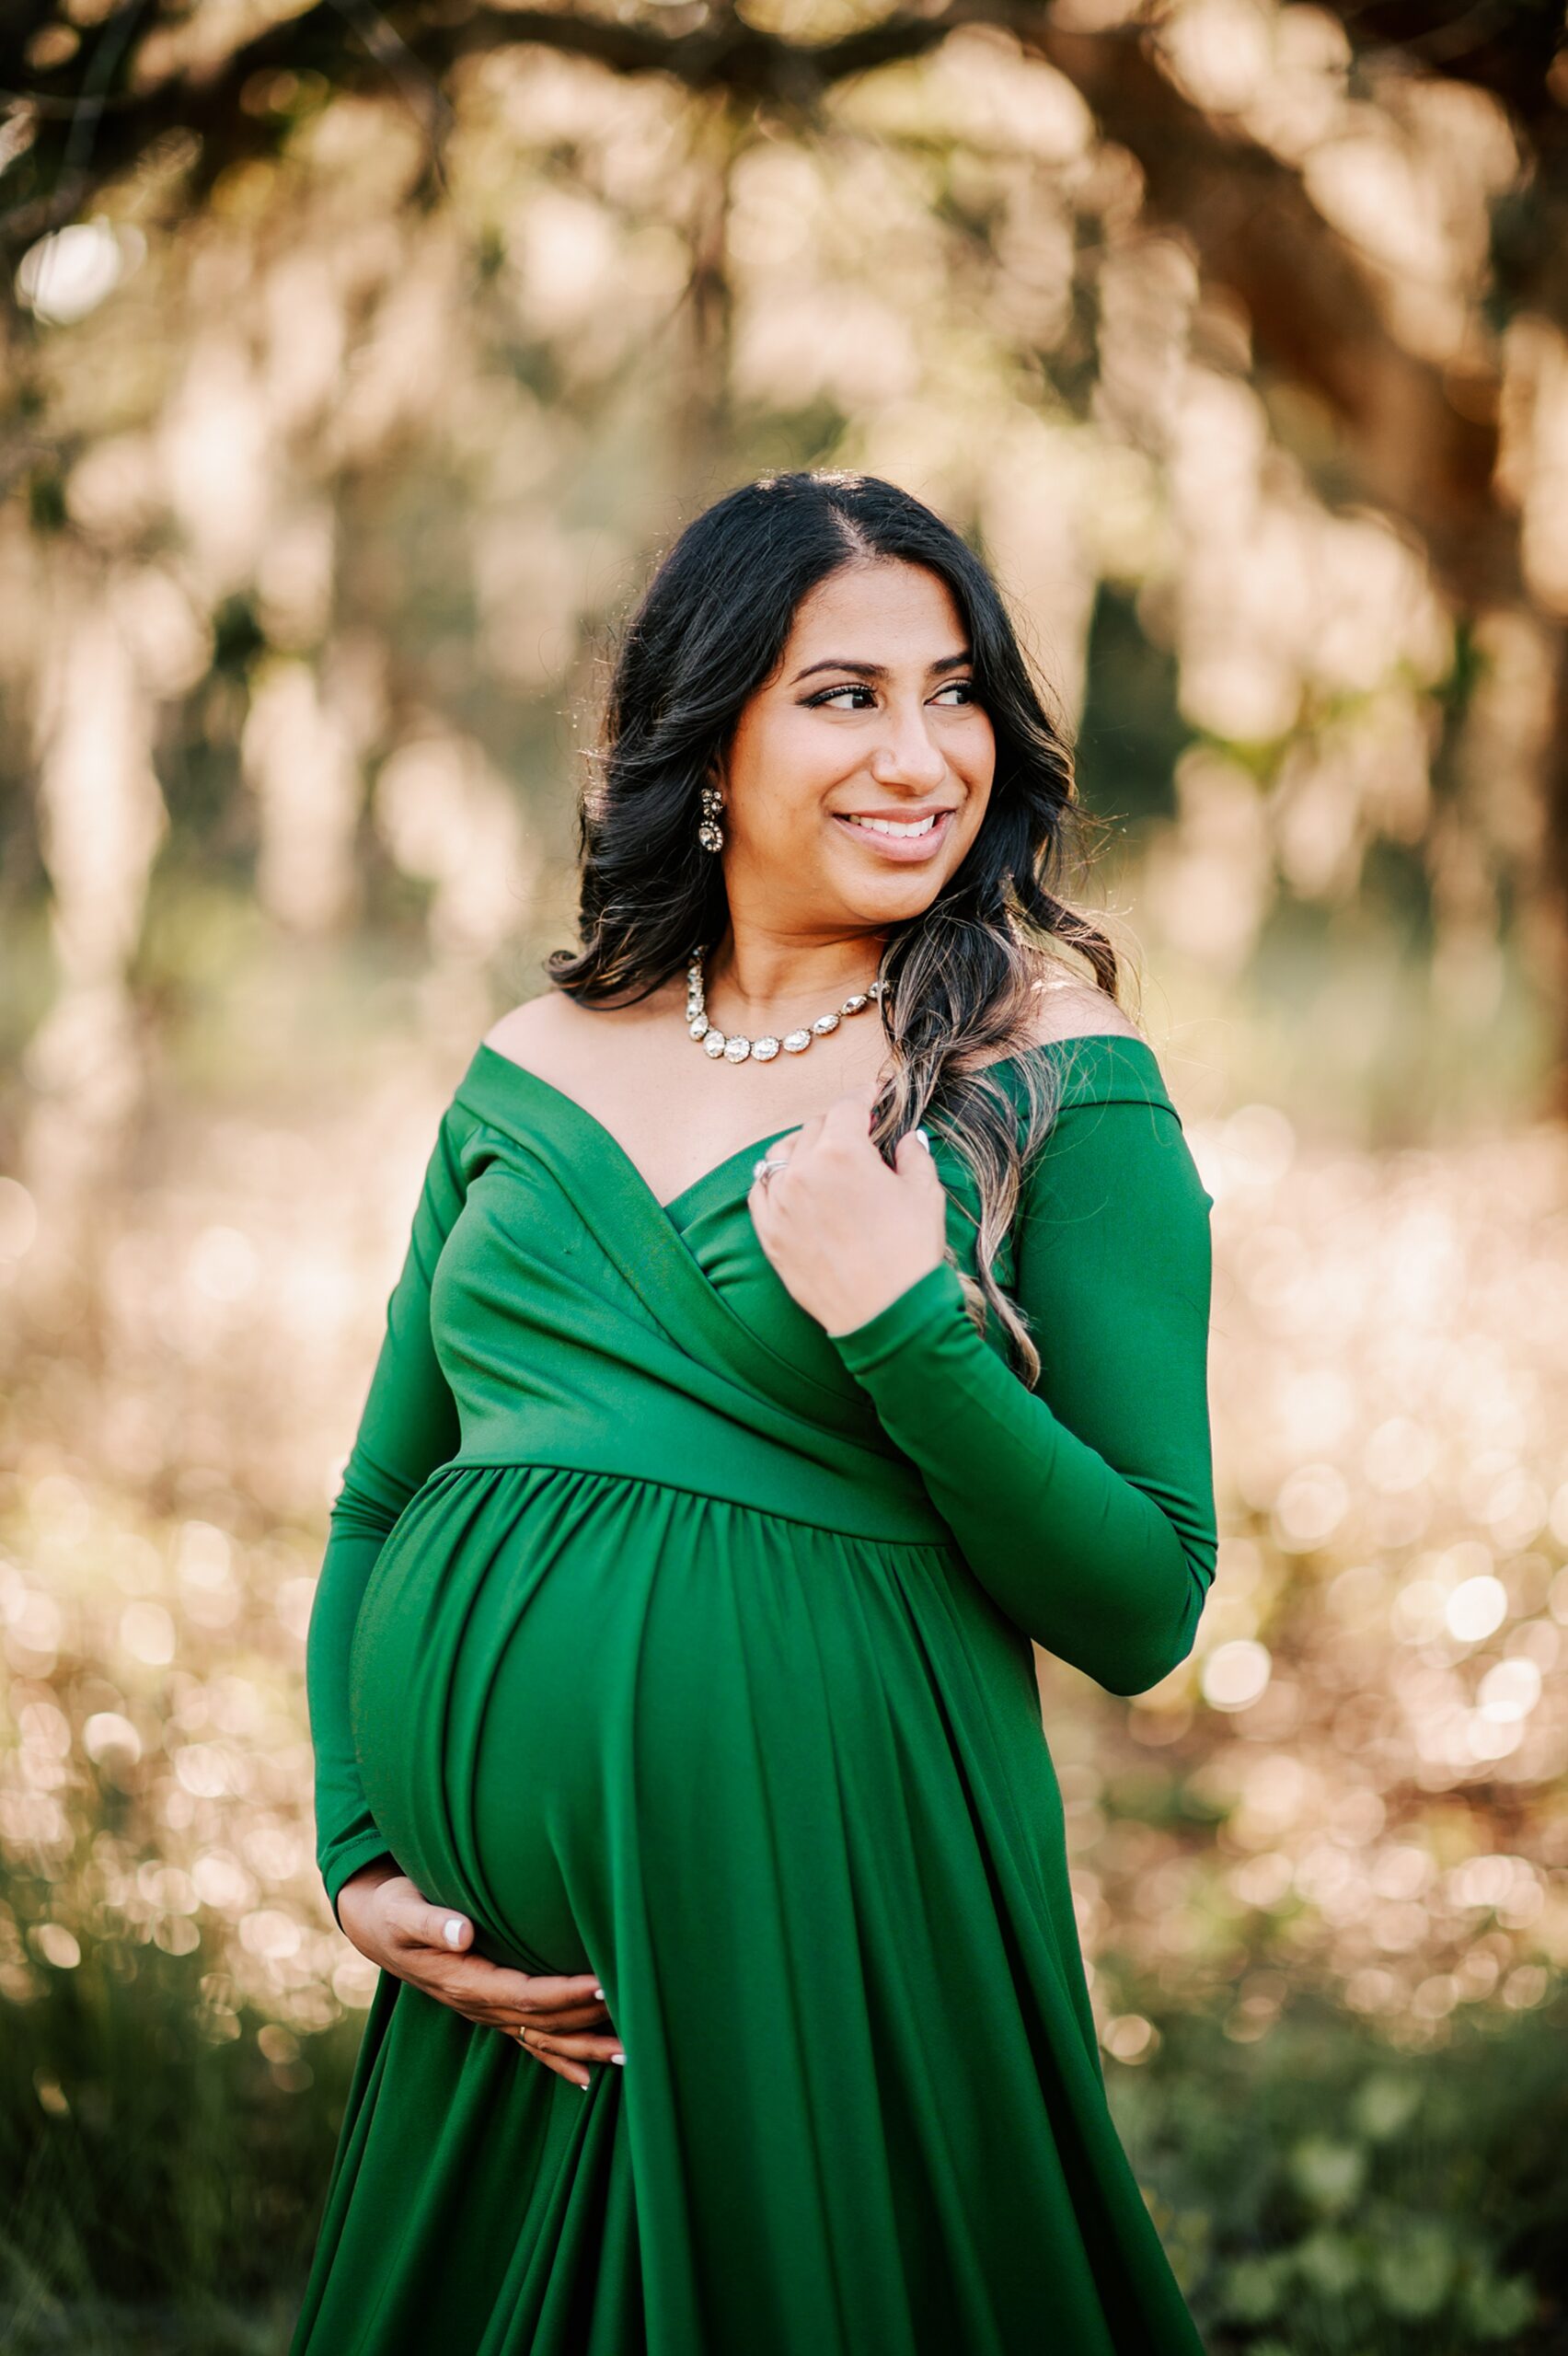 A mom to be stands in a forest at sunset in a green maternity gown smiling and holding the bump after visiting unc birth center